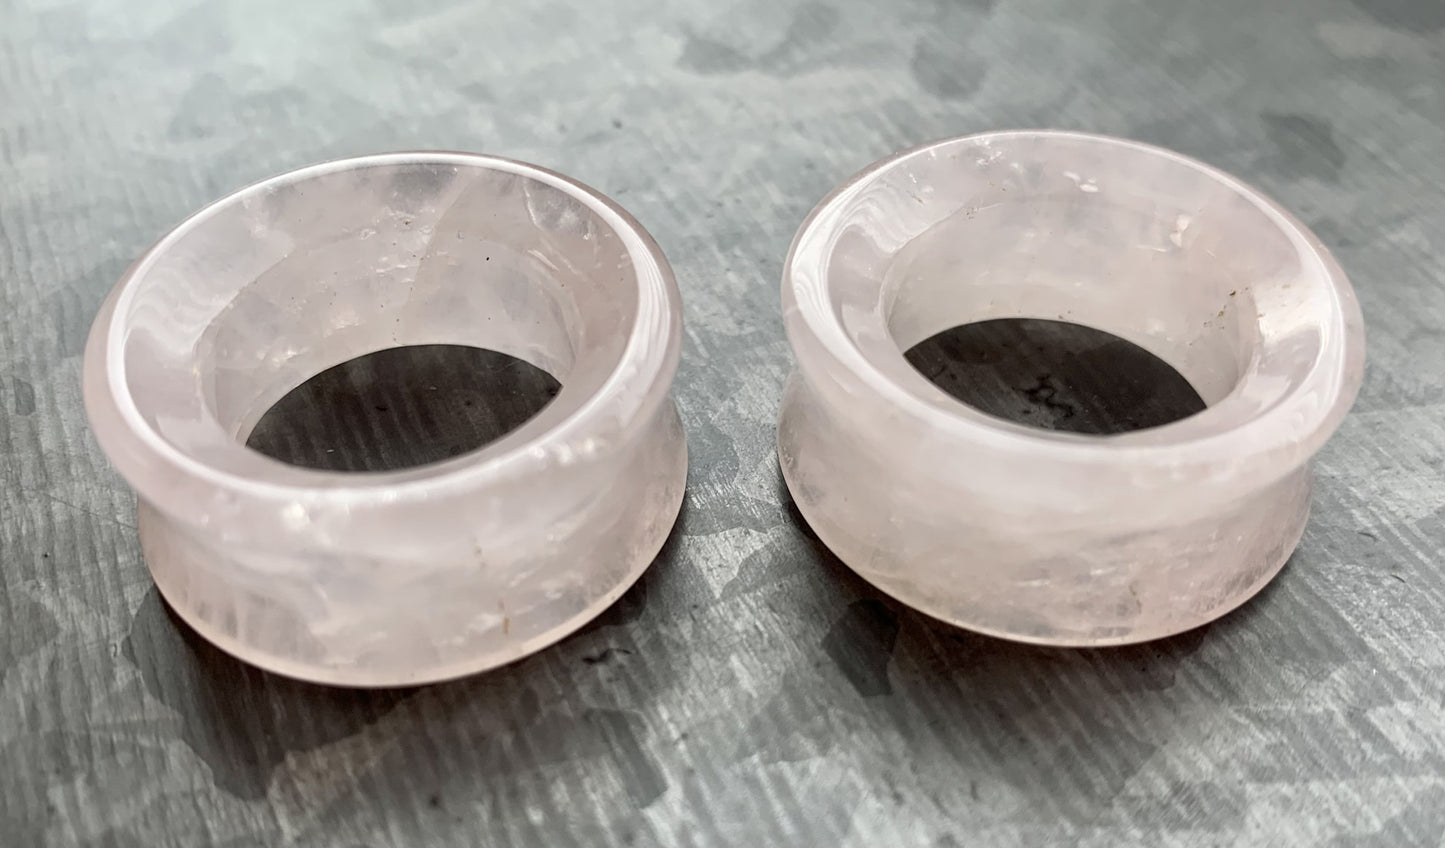 PAIR of Stunning Rose Quartz Natural Stone Double Flare Tunnels / Plugs - Gauges 2g (6mm) up to 1" (25mm) available!